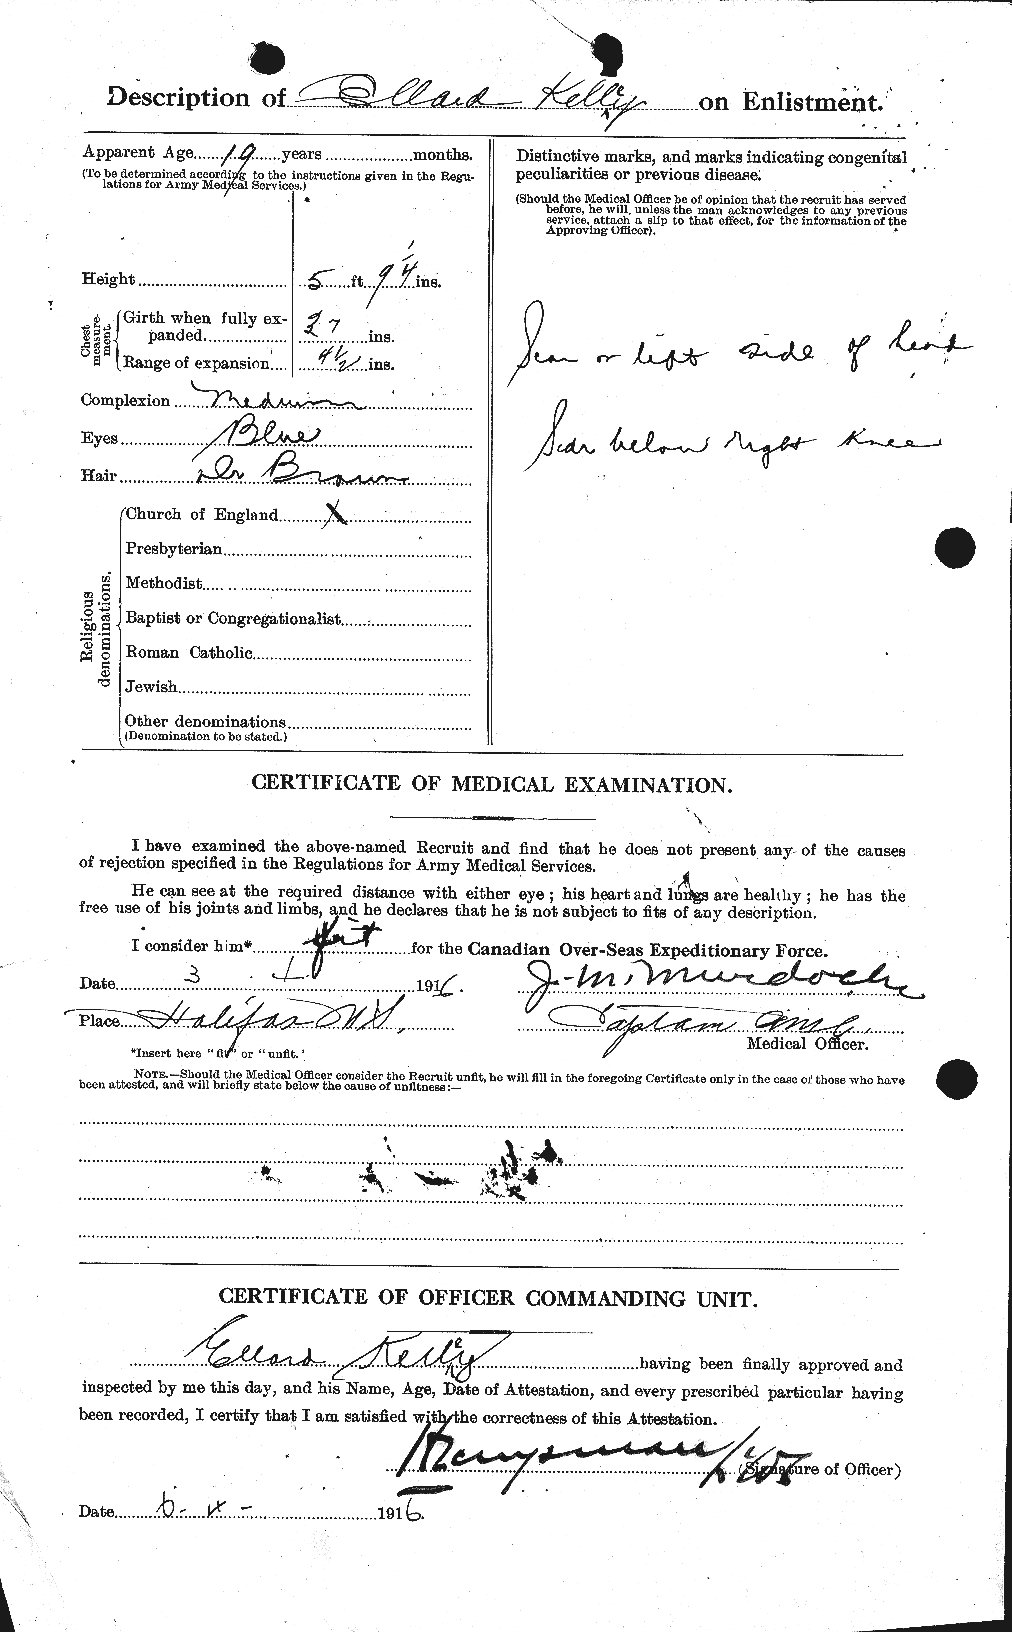 Personnel Records of the First World War - CEF 429020b